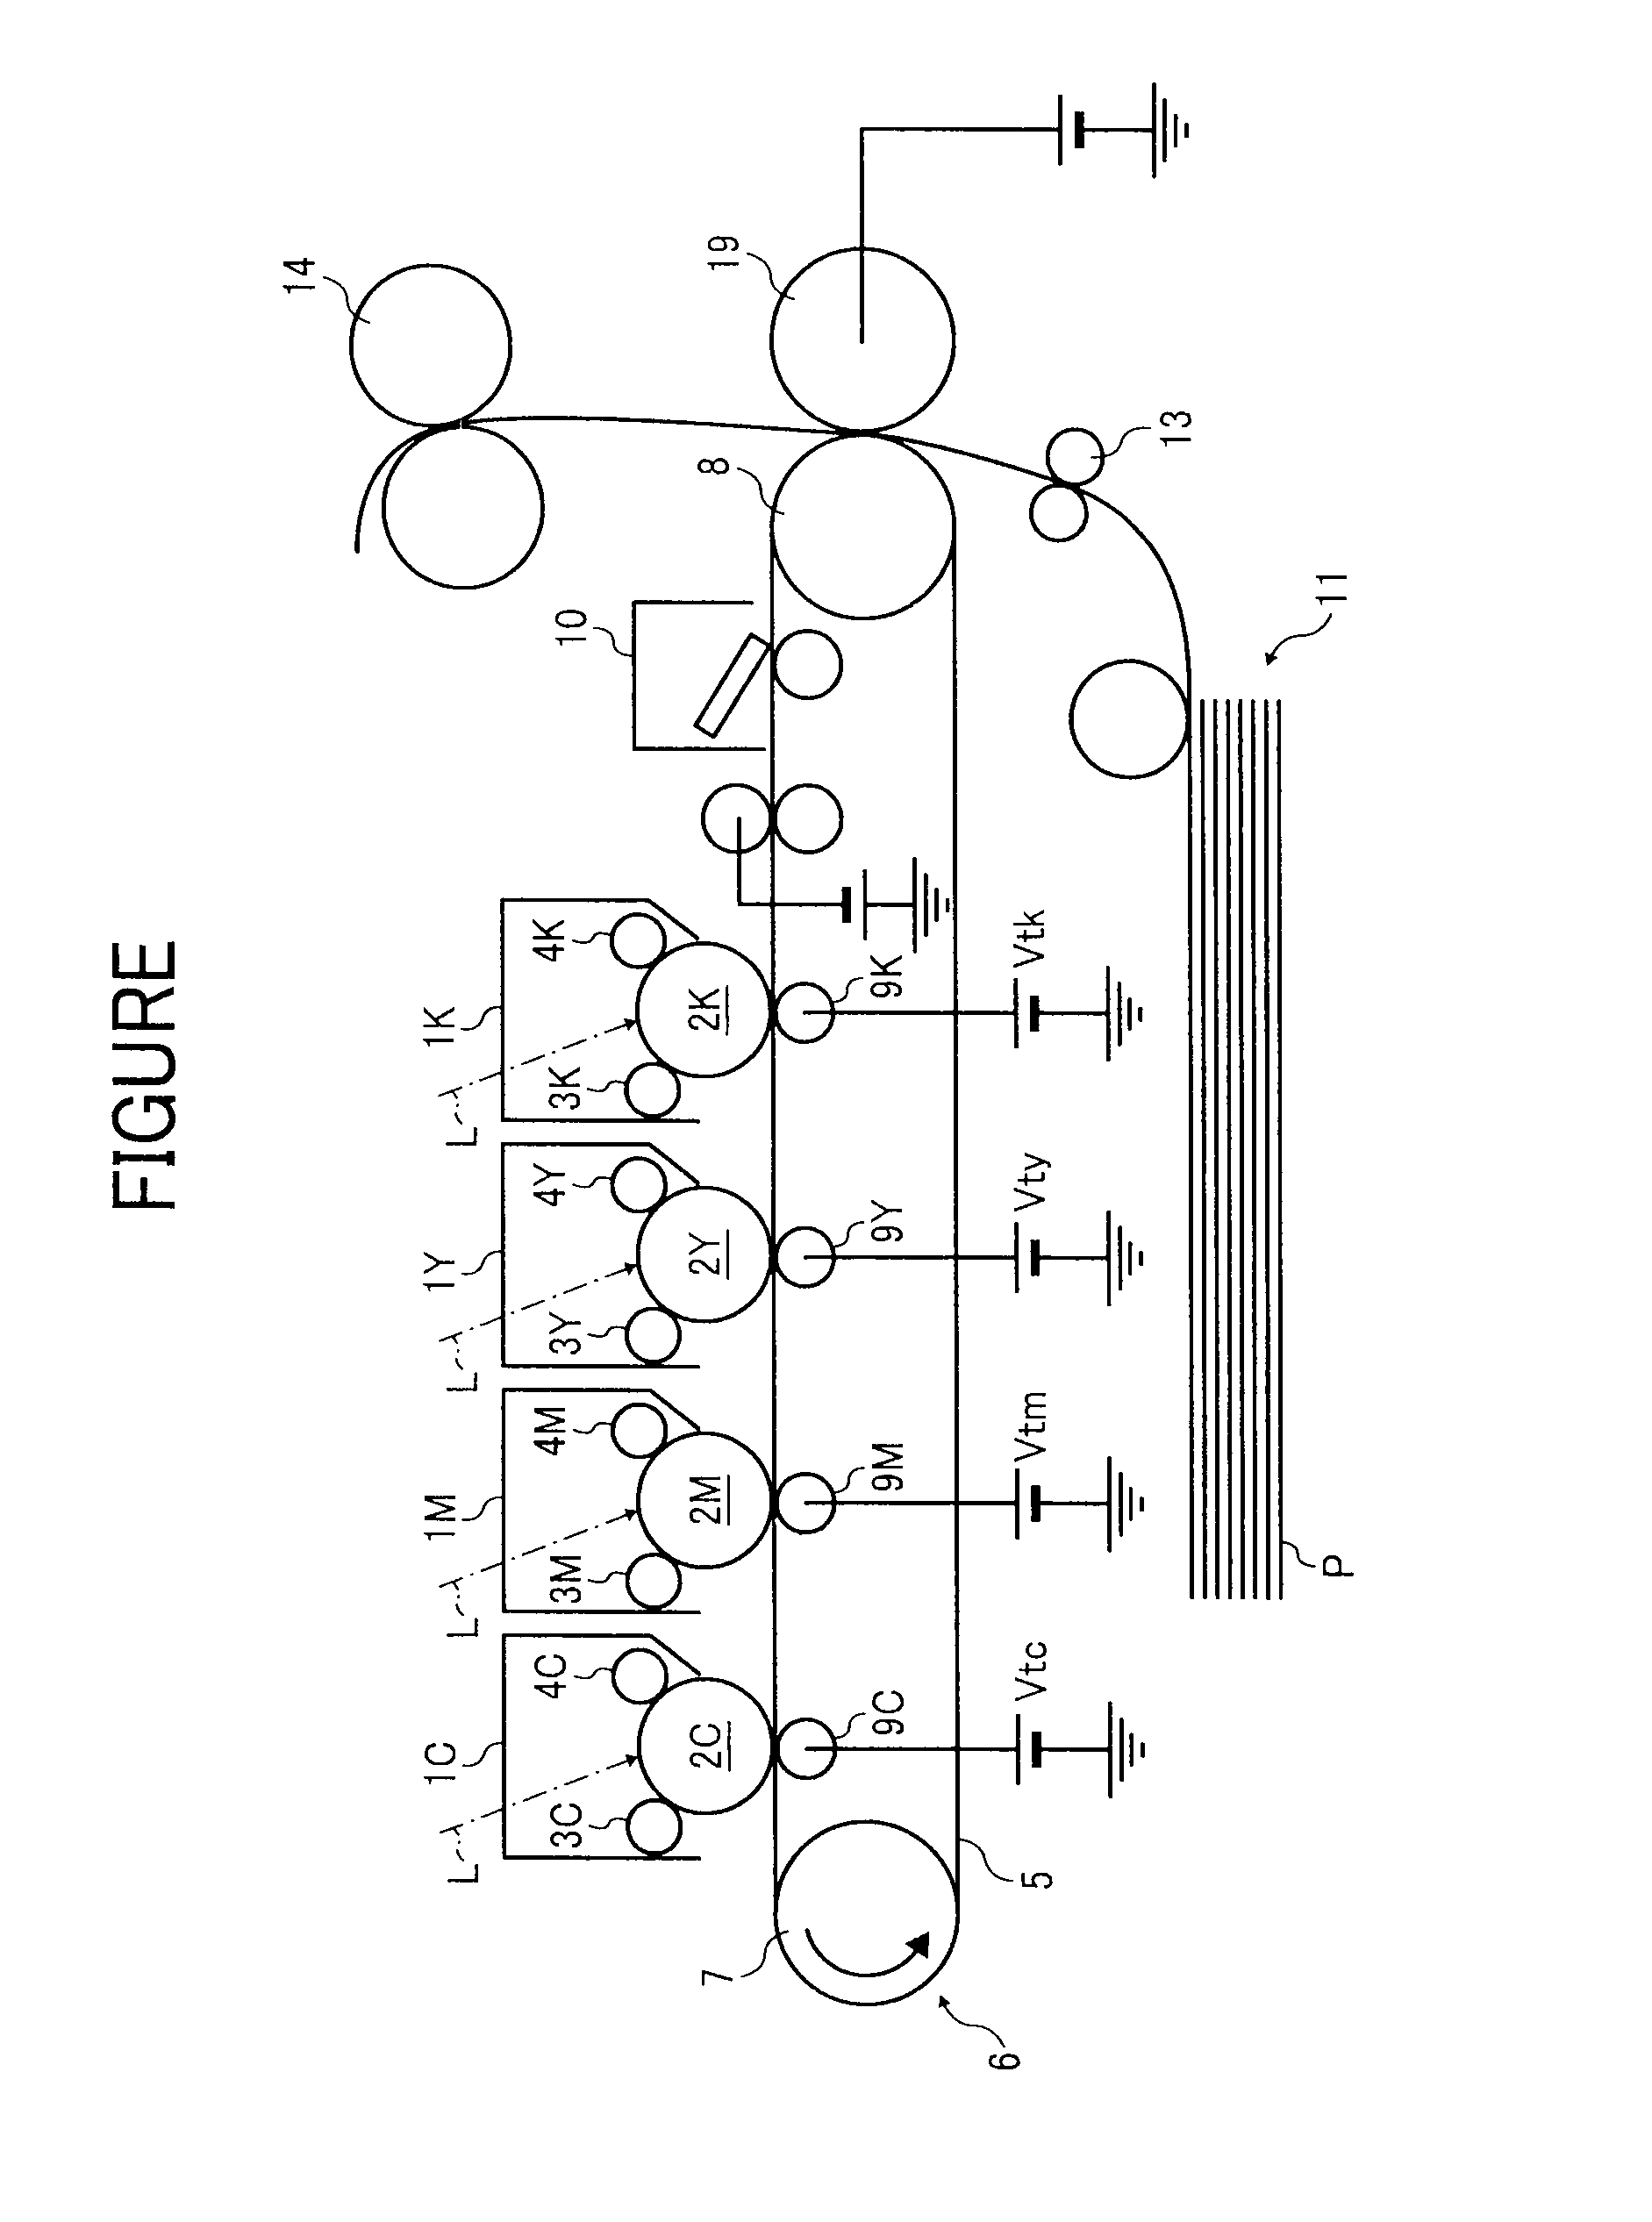 Conductive composition, electrophotographic belt, image forming apparatus, and method of manufacturing conductive composition